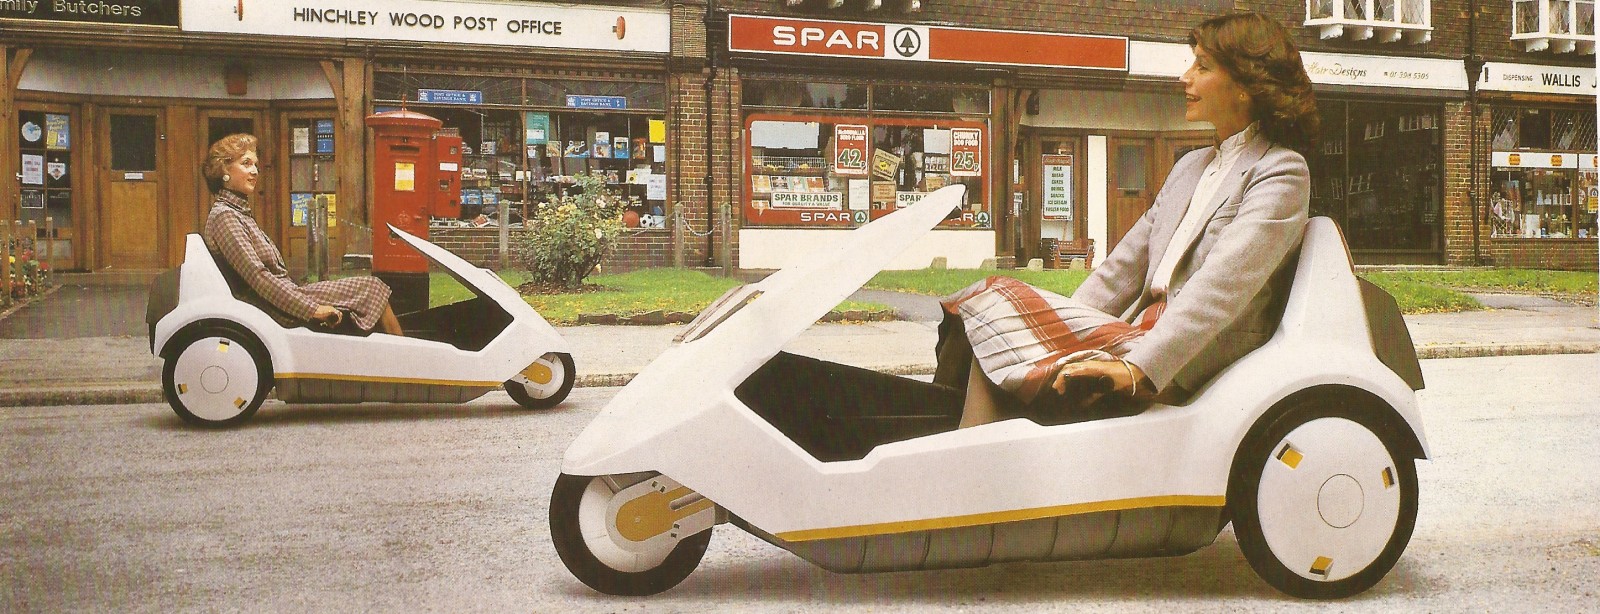 Lets go shopping in a Sinclair C5!